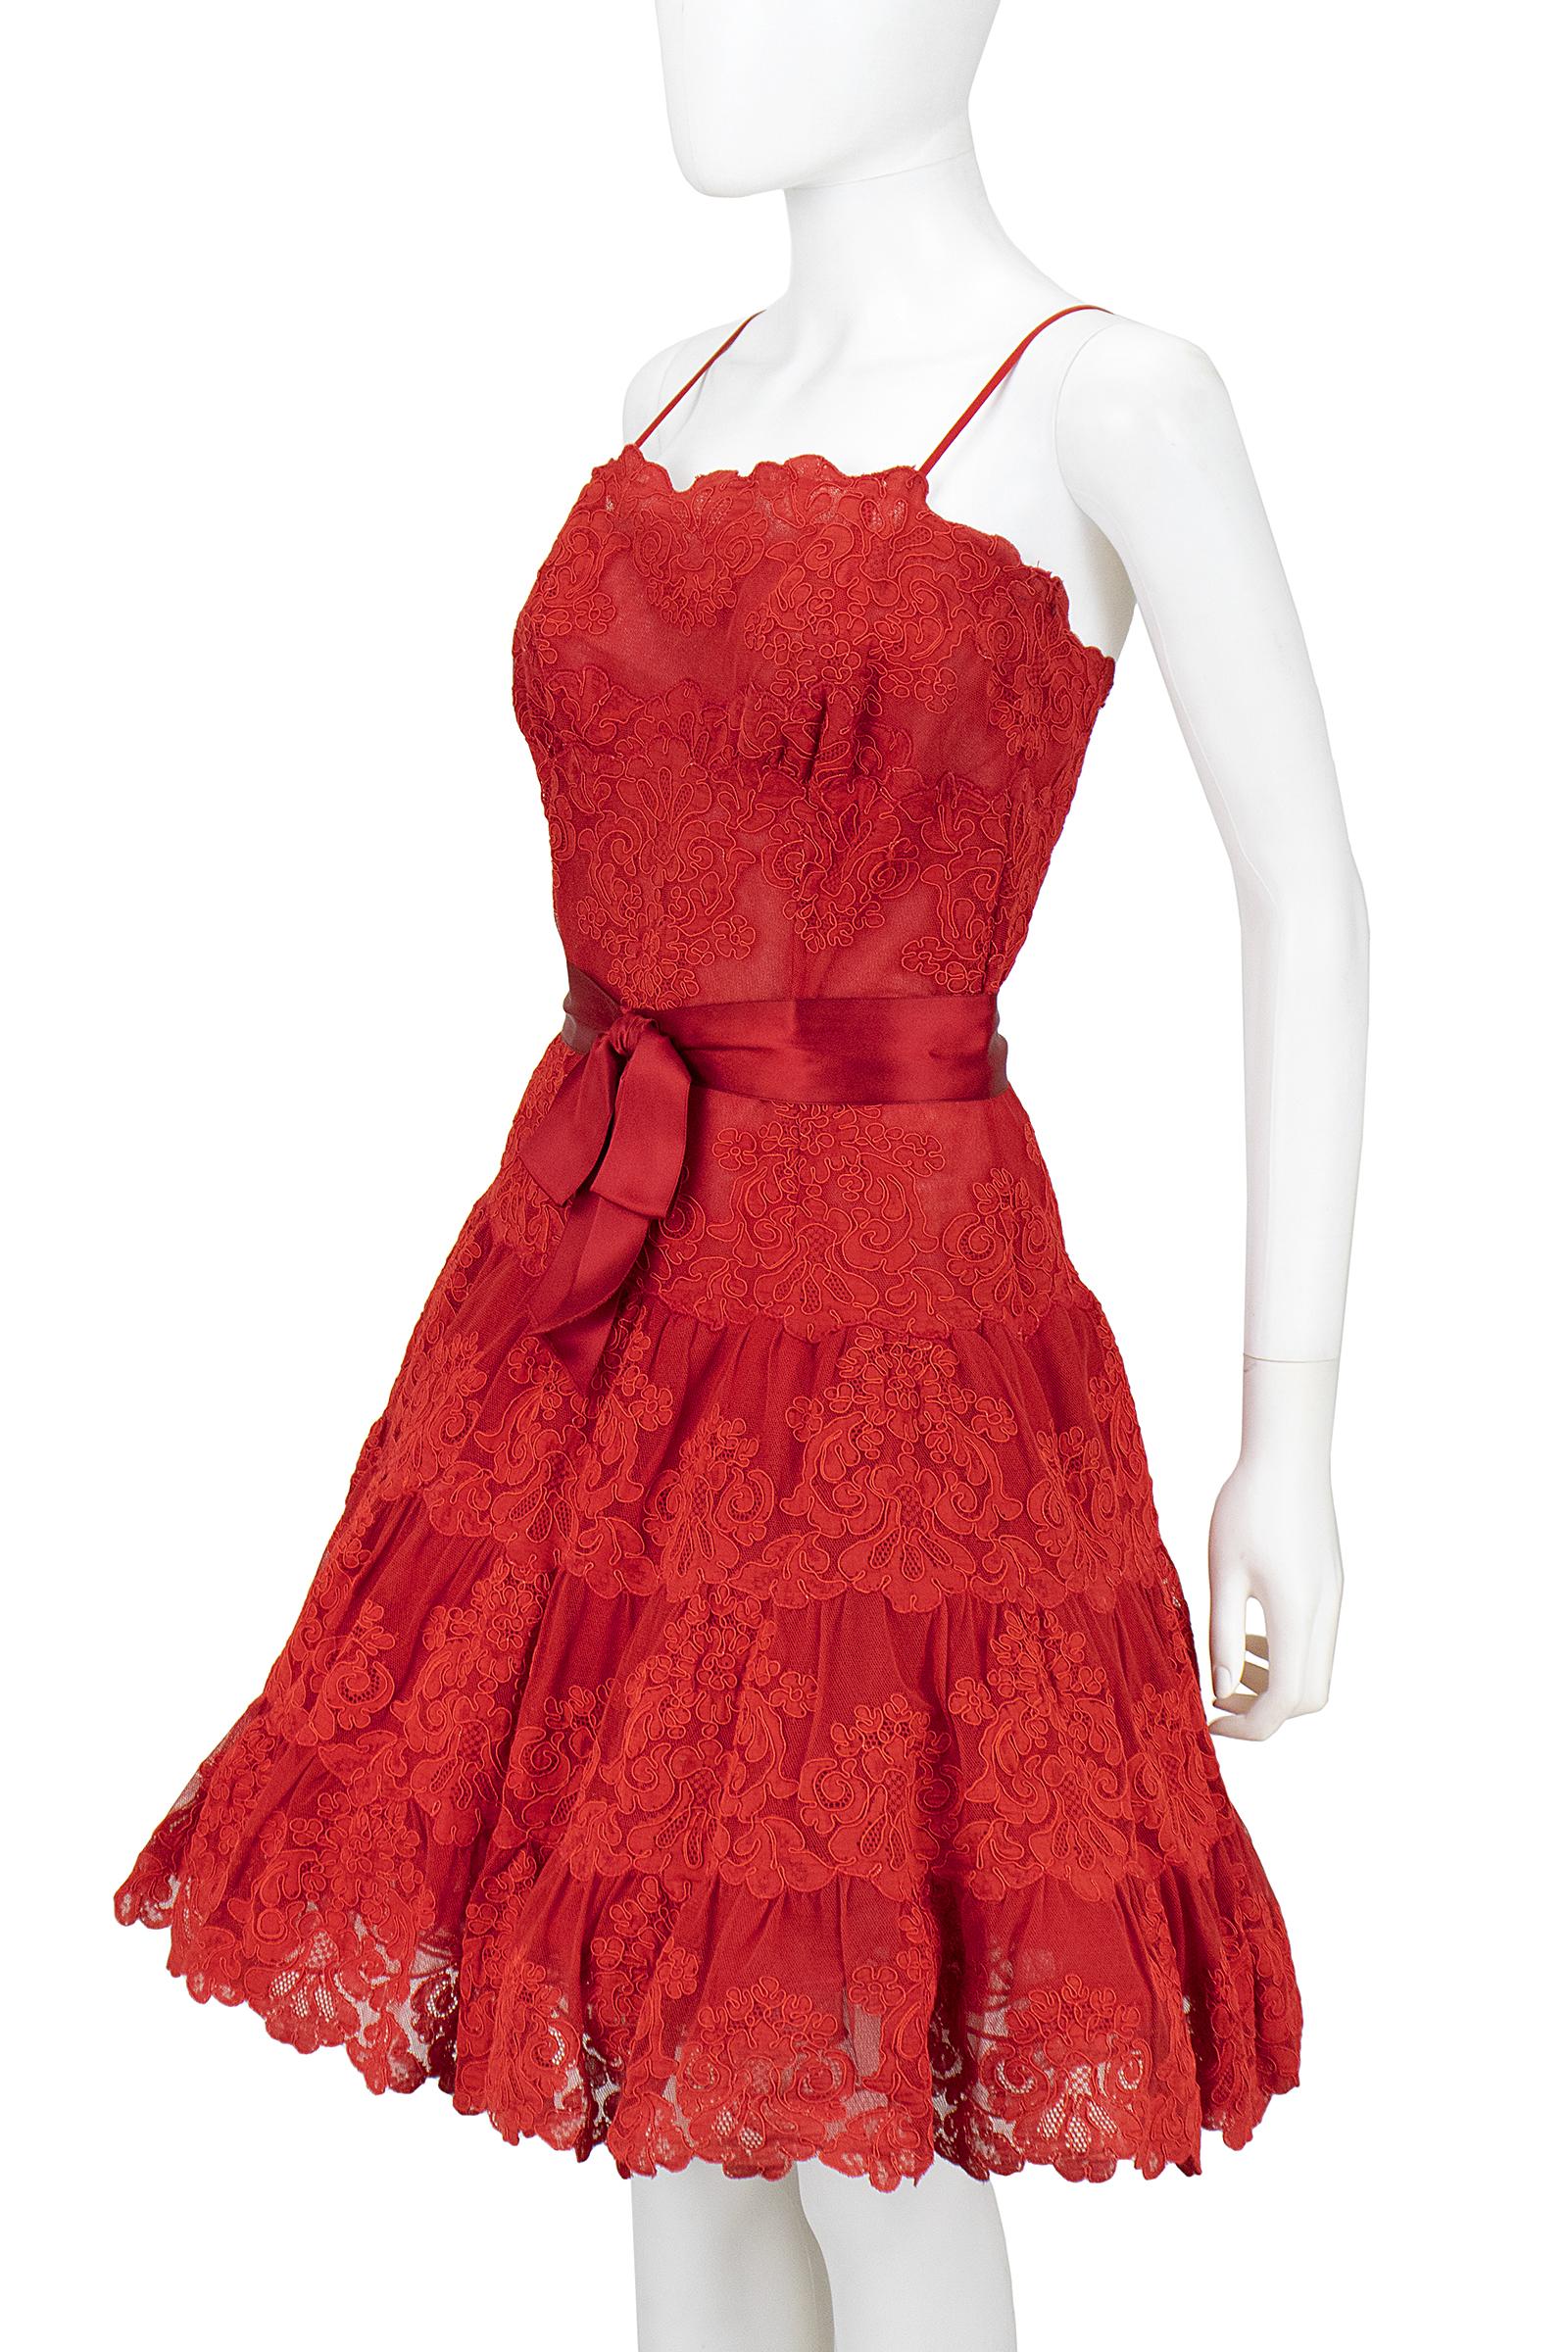  Vicky Tiel Couture Circa 1990s Red Lace Cocktail Dress For Sale 1